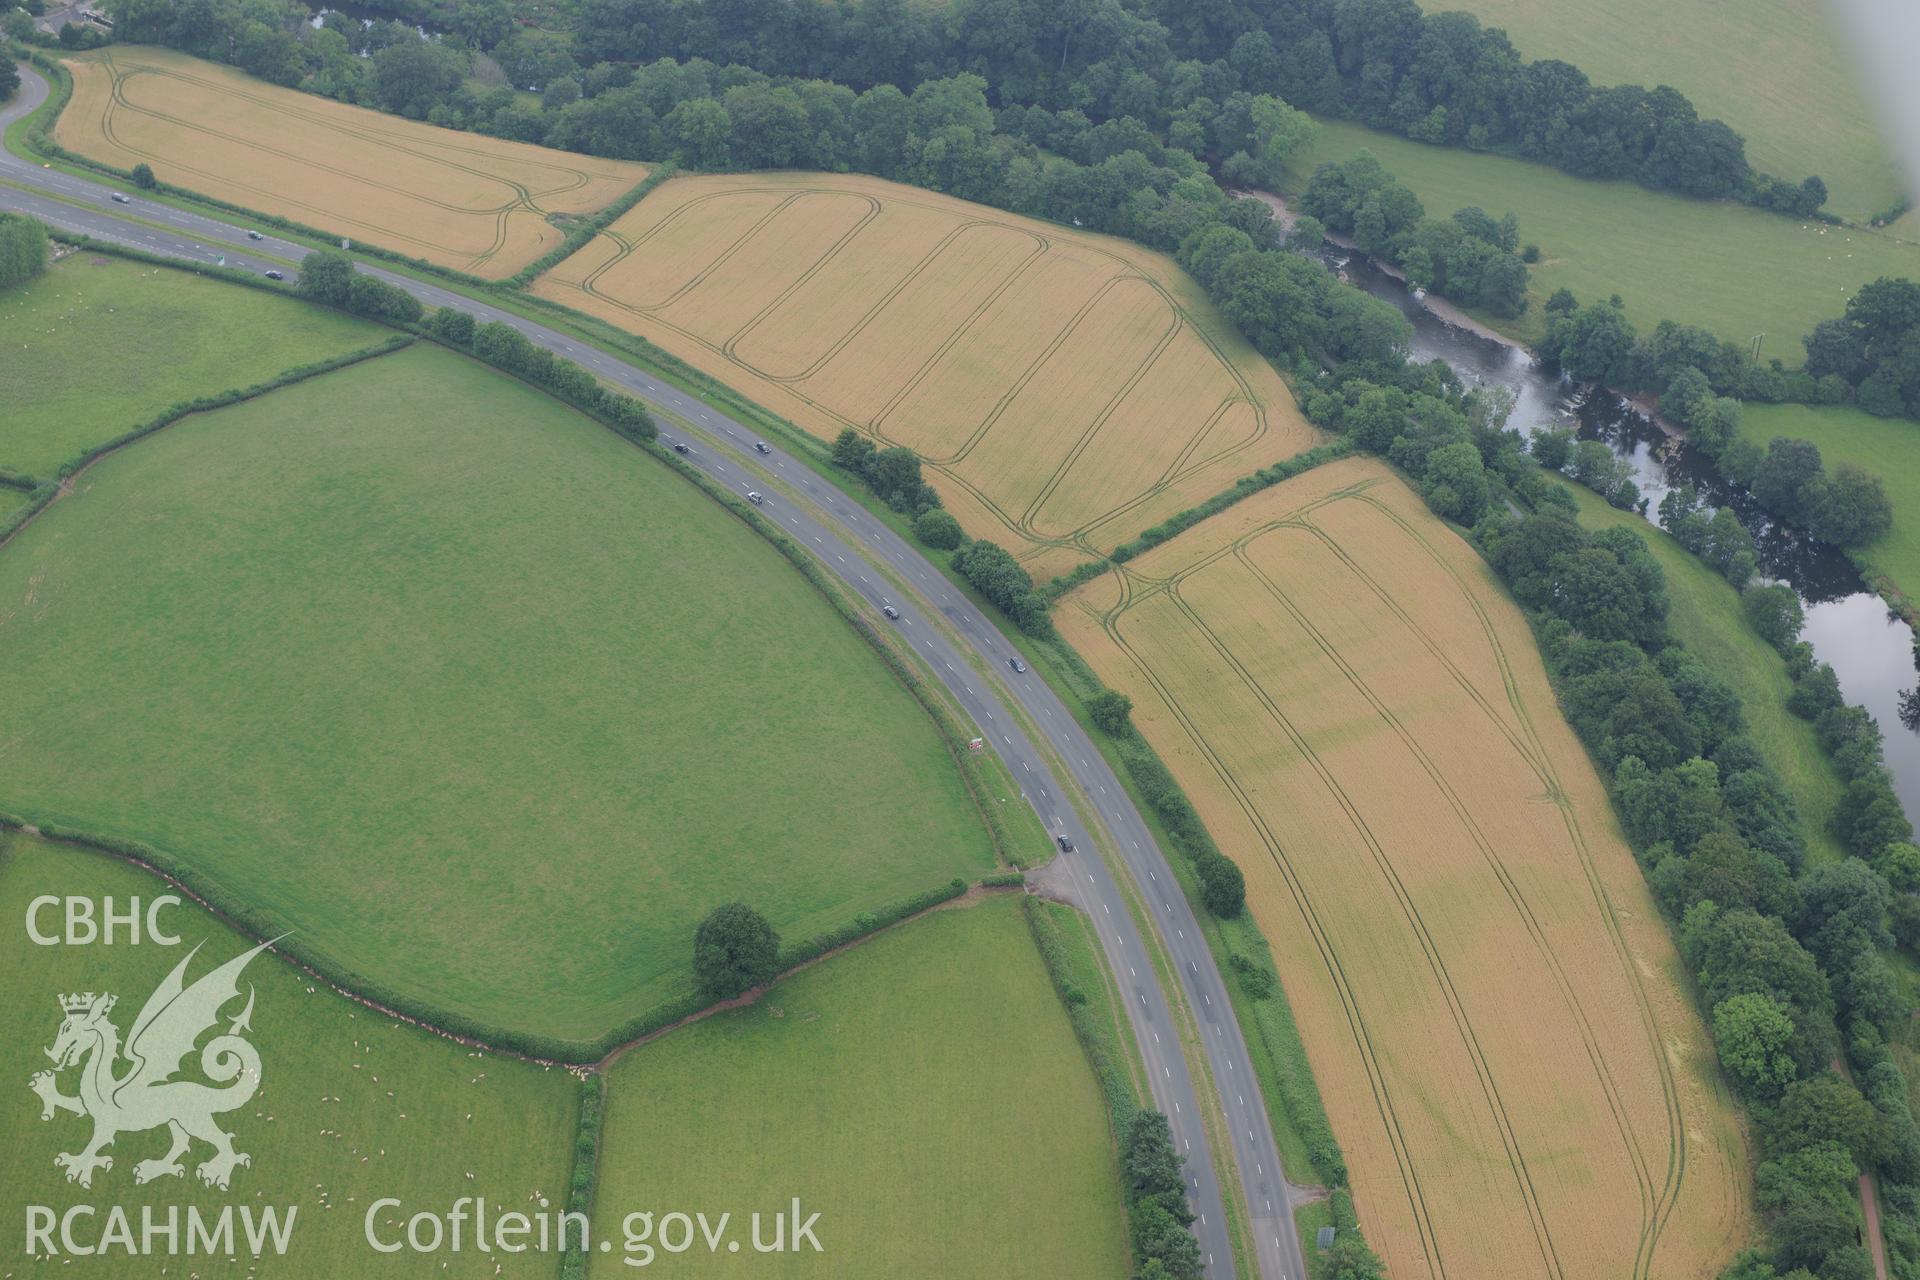 Cefn-brynich Roman fort, general view of cropmarks from north-west, taken by RCAHMW 1st August 2013.